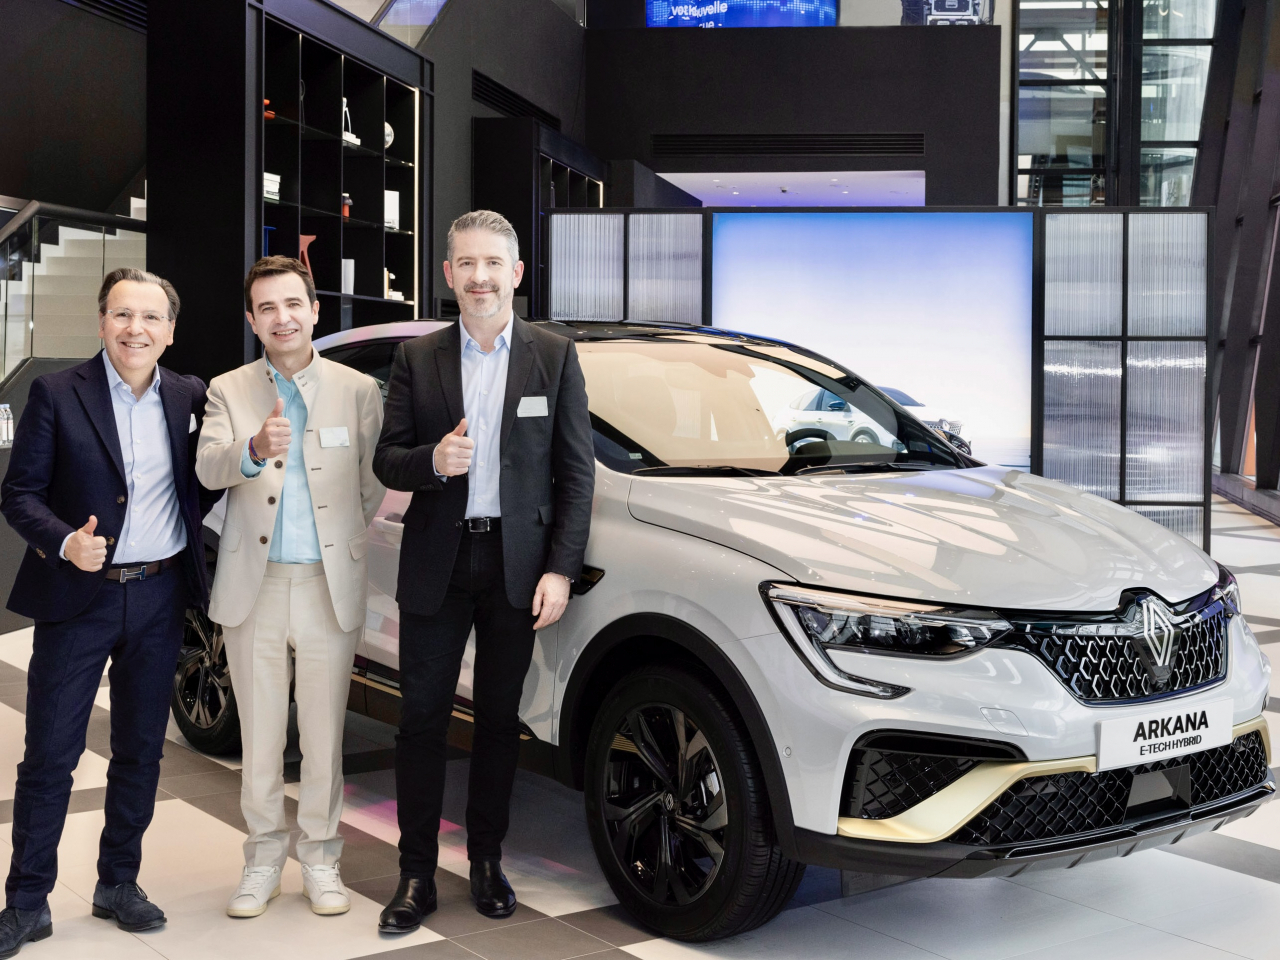 From left: Arnaud Belloni, Renault Group's vice president of global marketing, Stephane Deblaise, CEO of Renault Korea, and Gilles Vidal, the group's design director, stand next to the renamed Renault Arkana, formerly the XM3, during a press conference in Seoul on Wednesday. (Renault Korea)